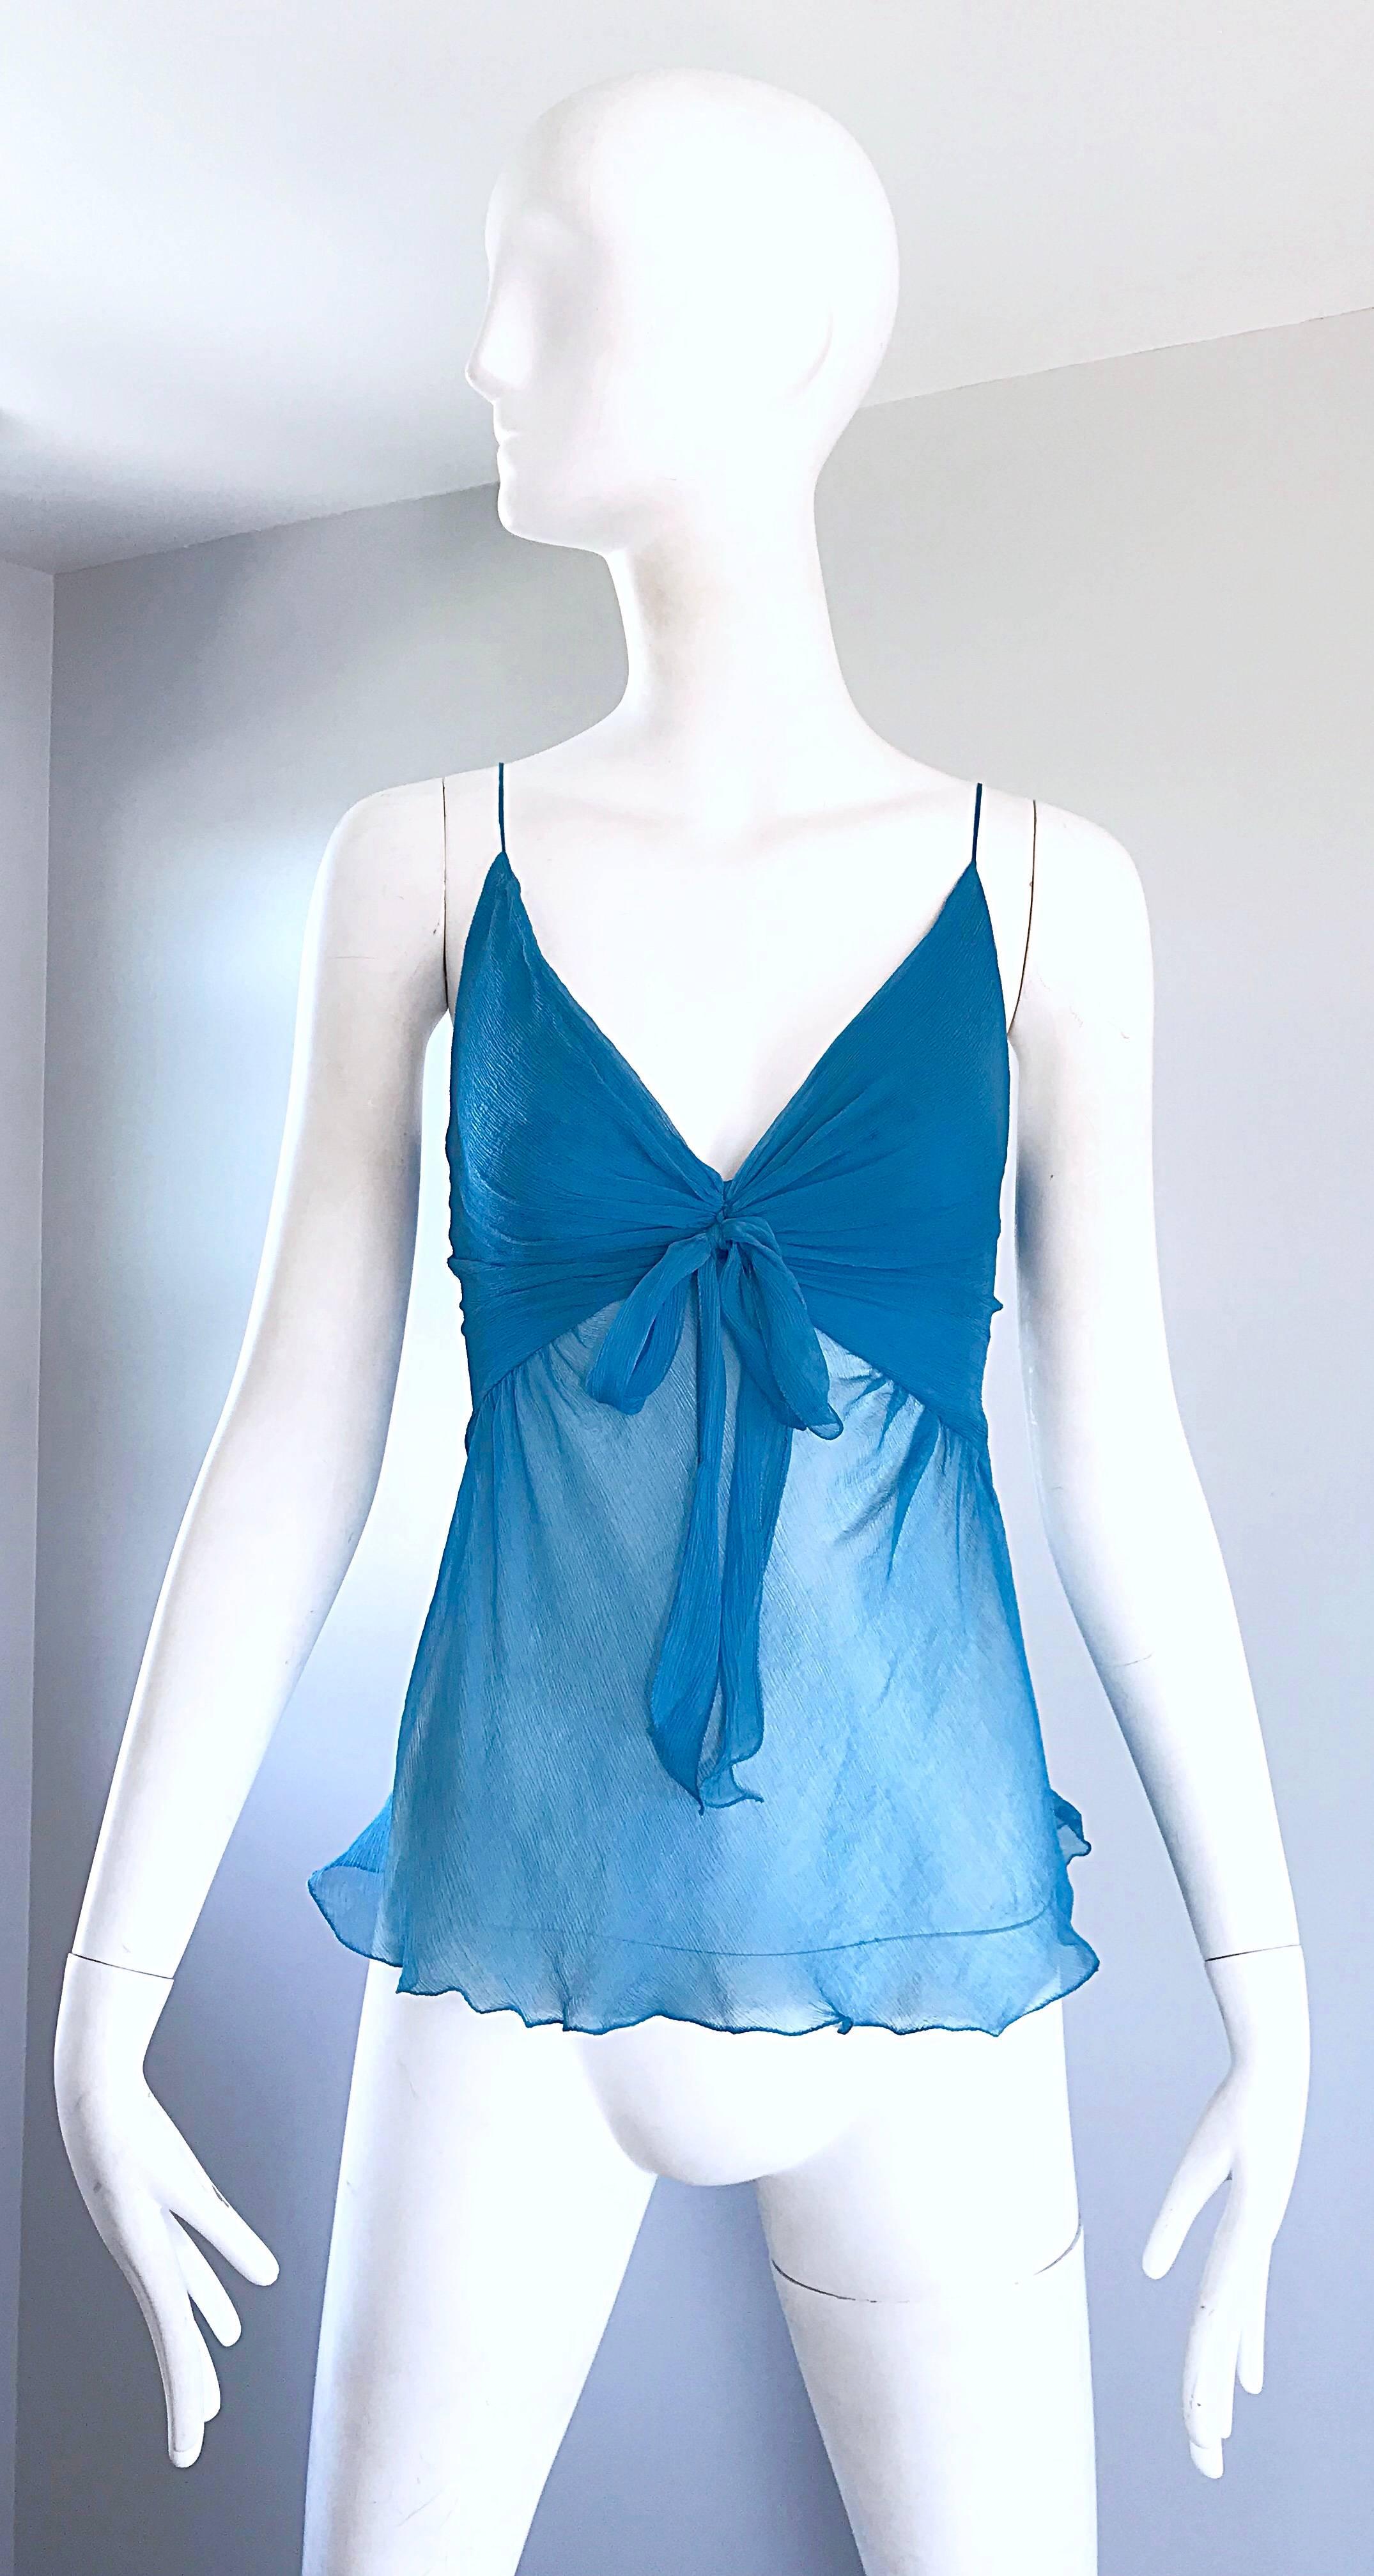 Beautiful 1990s ALESSANDRO DELL'ACQUA turquoise blue silk chiffon semi sheer sleeveless empire waist blouse! This piece if from the fashion designer's first line, which was created in 1996. Features a tie in the front. Fitted bust with a free